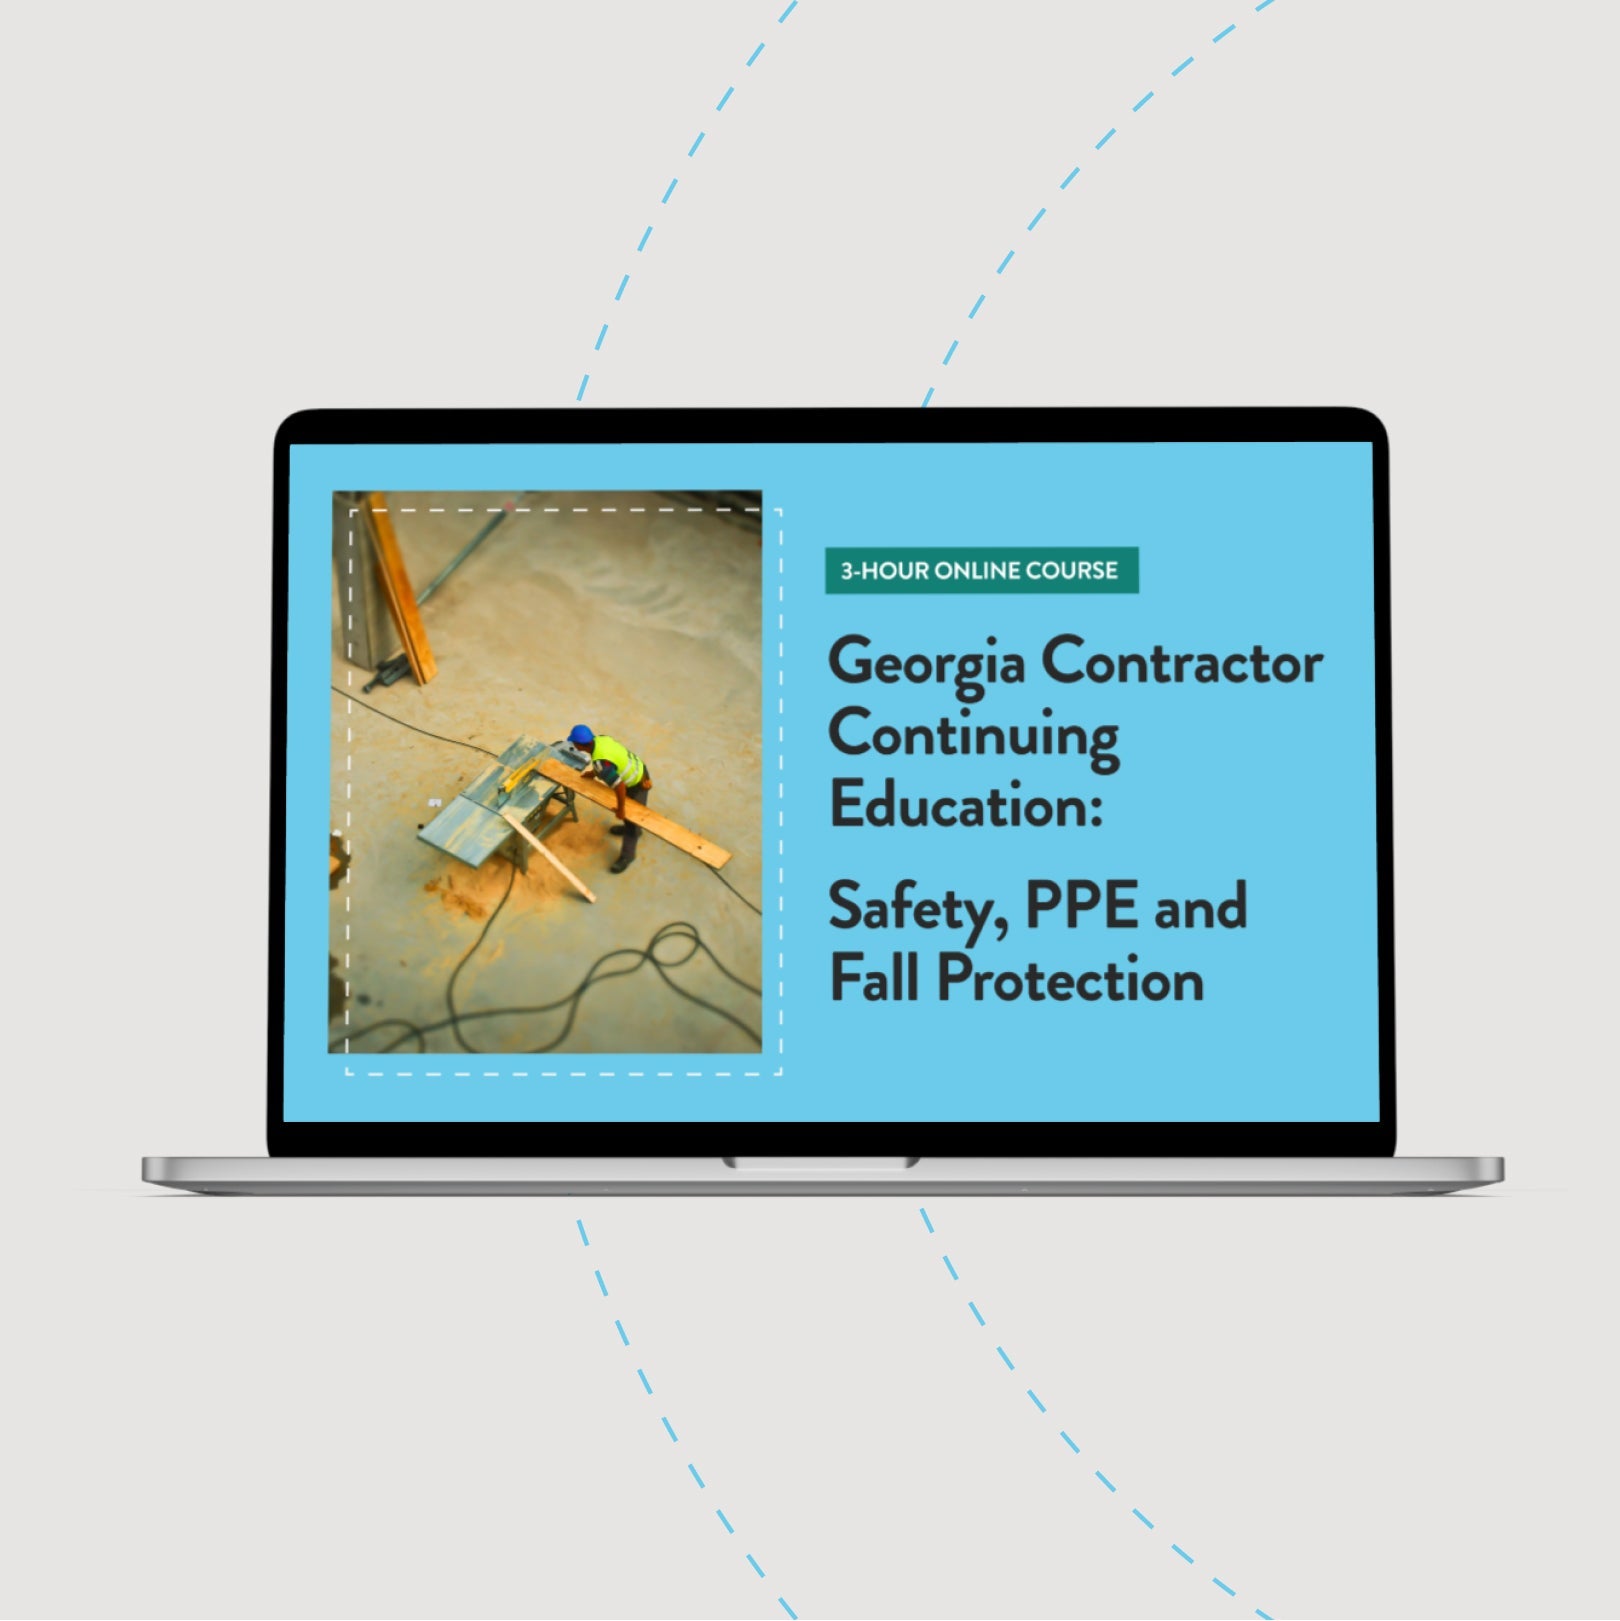 Georgia Contractor Continuing Education: Safety, PPE and Fall Protection - 3-Hour Online Course